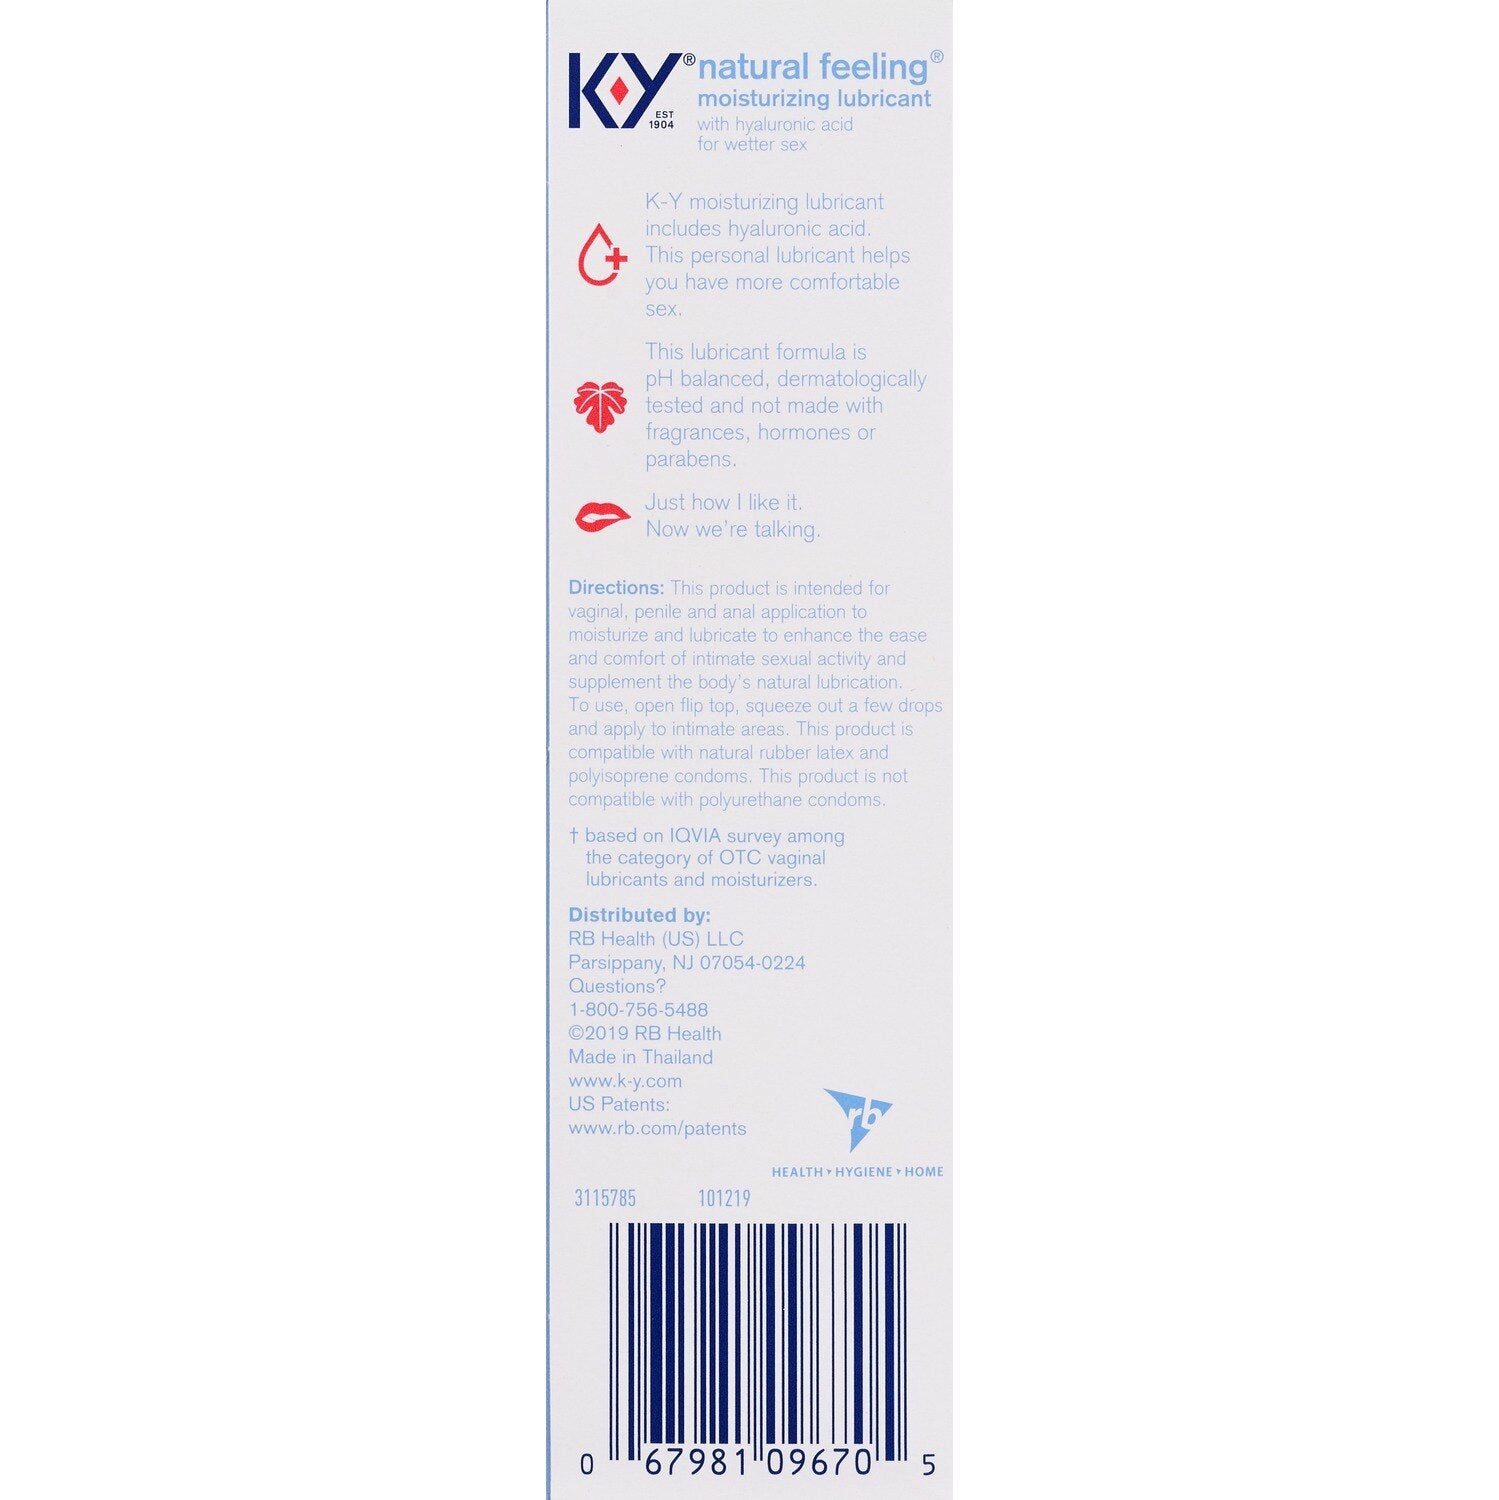 K-Y Natural Feeling Water Based Personal Lubricant with Hyaluronic Acid, 3.38 OZ